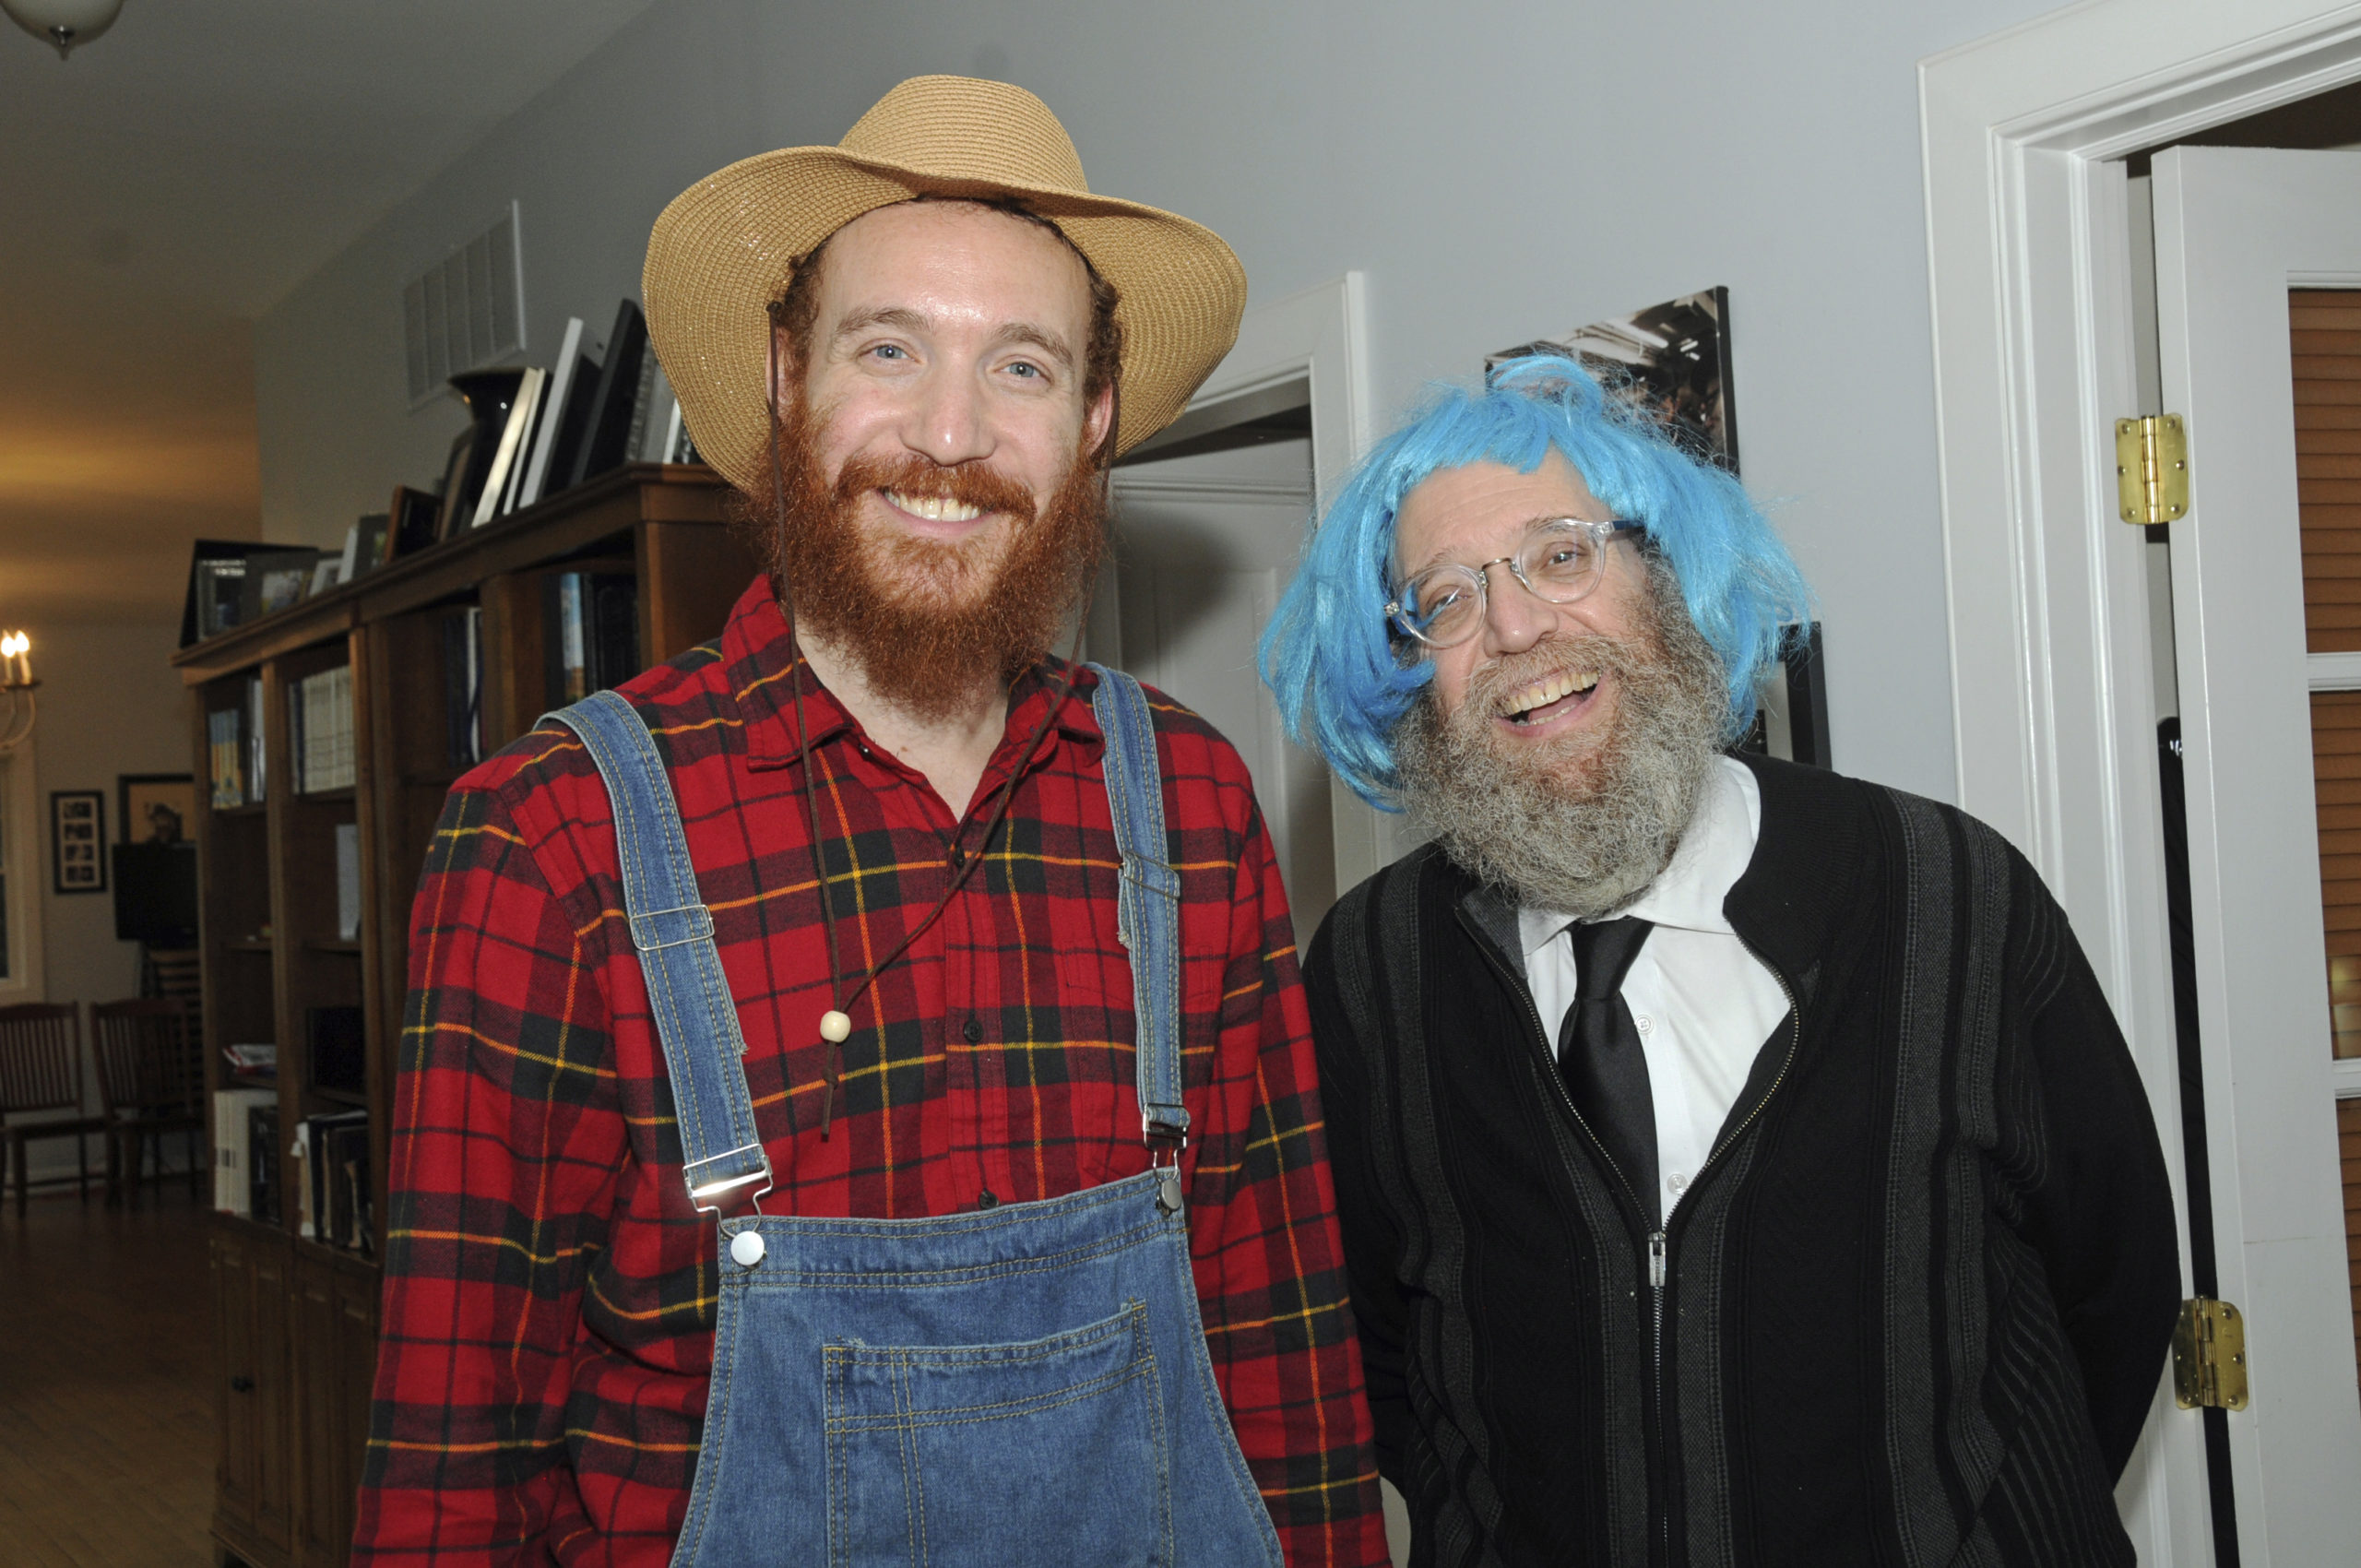 Rabbis Aizik Baumgarten and Leibel Baumgarten at the Festival of Purim at Chabad of the Hamptons in East Hampton. Following the traditional Megillah (Book of Esther) Reading, guests, some in costumes for the occasion, enjoyed a Grand Purim Feast.   RICHARD LEWIN